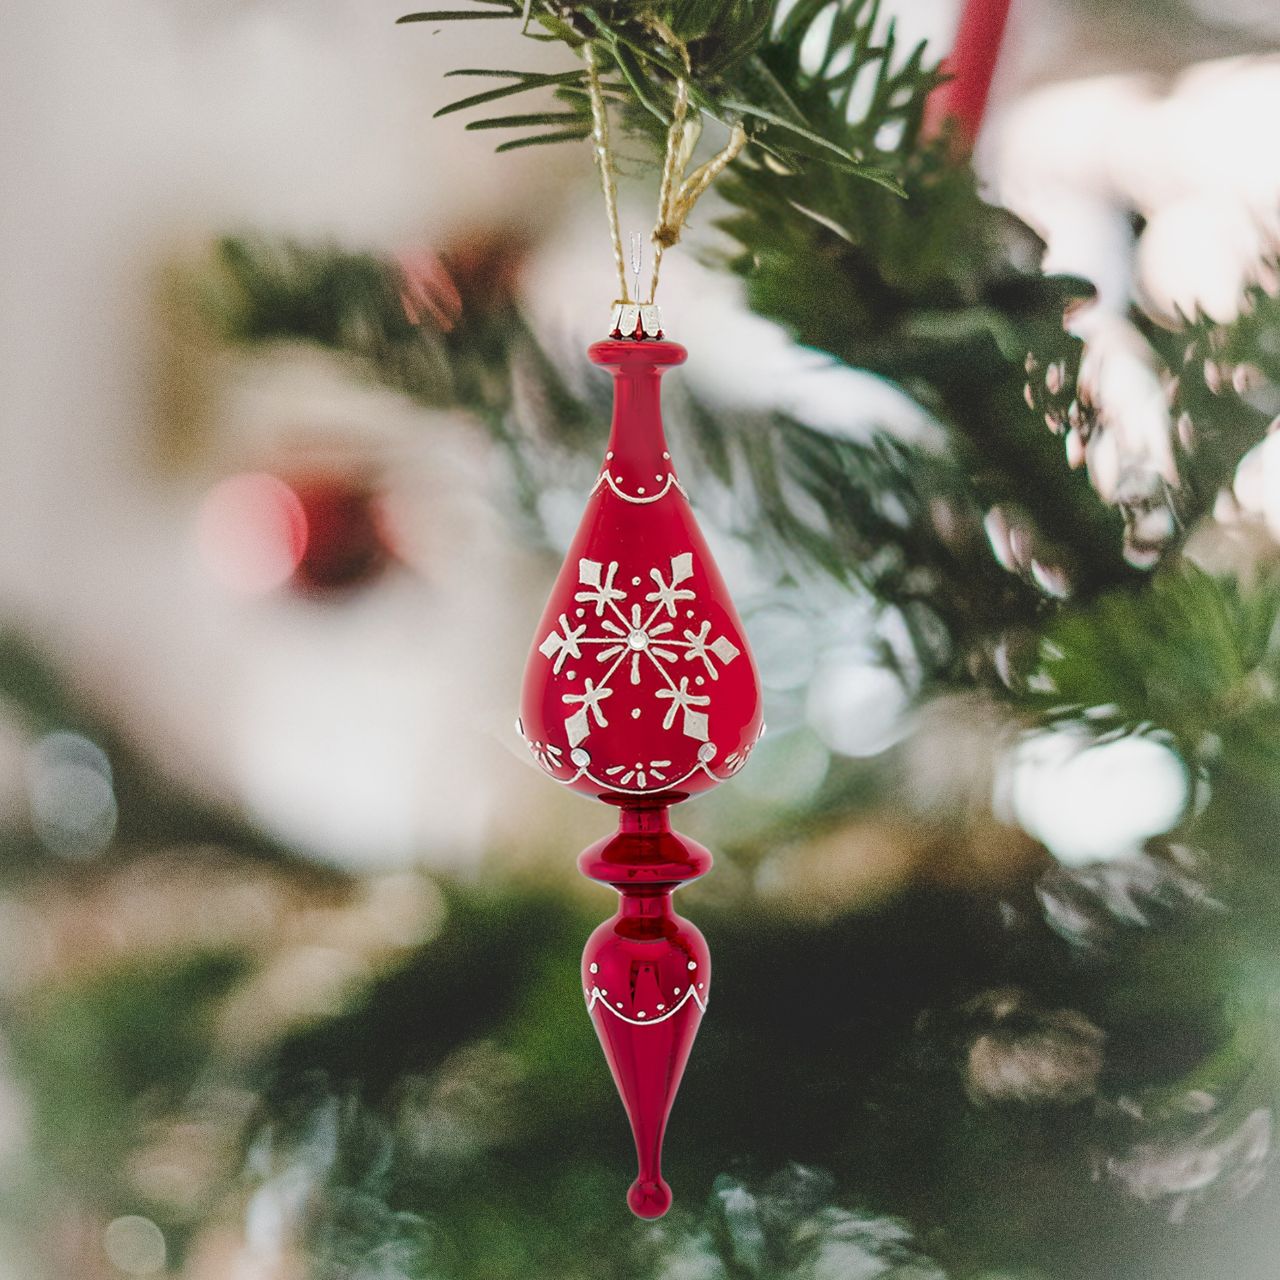 Kurt S Adler Glass Shiny Red Finial Christmas Ornament Teardrop  Teardrop Shape Shiny Red Finial  These beautifully detailed shiny red glass finial ornaments from Kurt Adler are a festive addition to any holiday décor or Christmas tree. The glass finial is decorated with a white glittered snowflake pattern with clear gemstone accents.